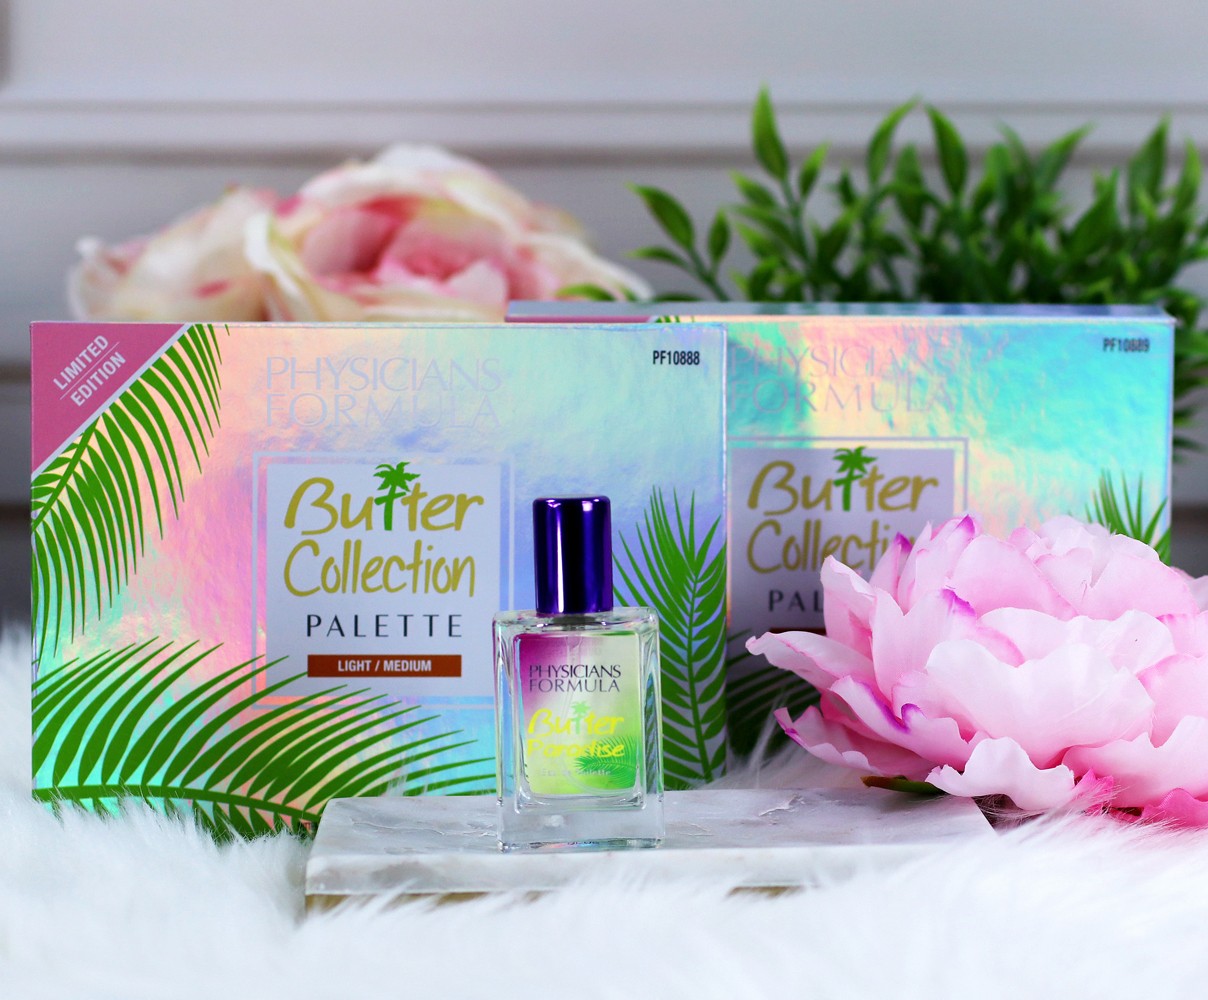 Physicians Formula Butter Collection Palette Review and Swatches by Popular Los Angeles Cruelty Free Beauty Blogger, My Beauty Bunny